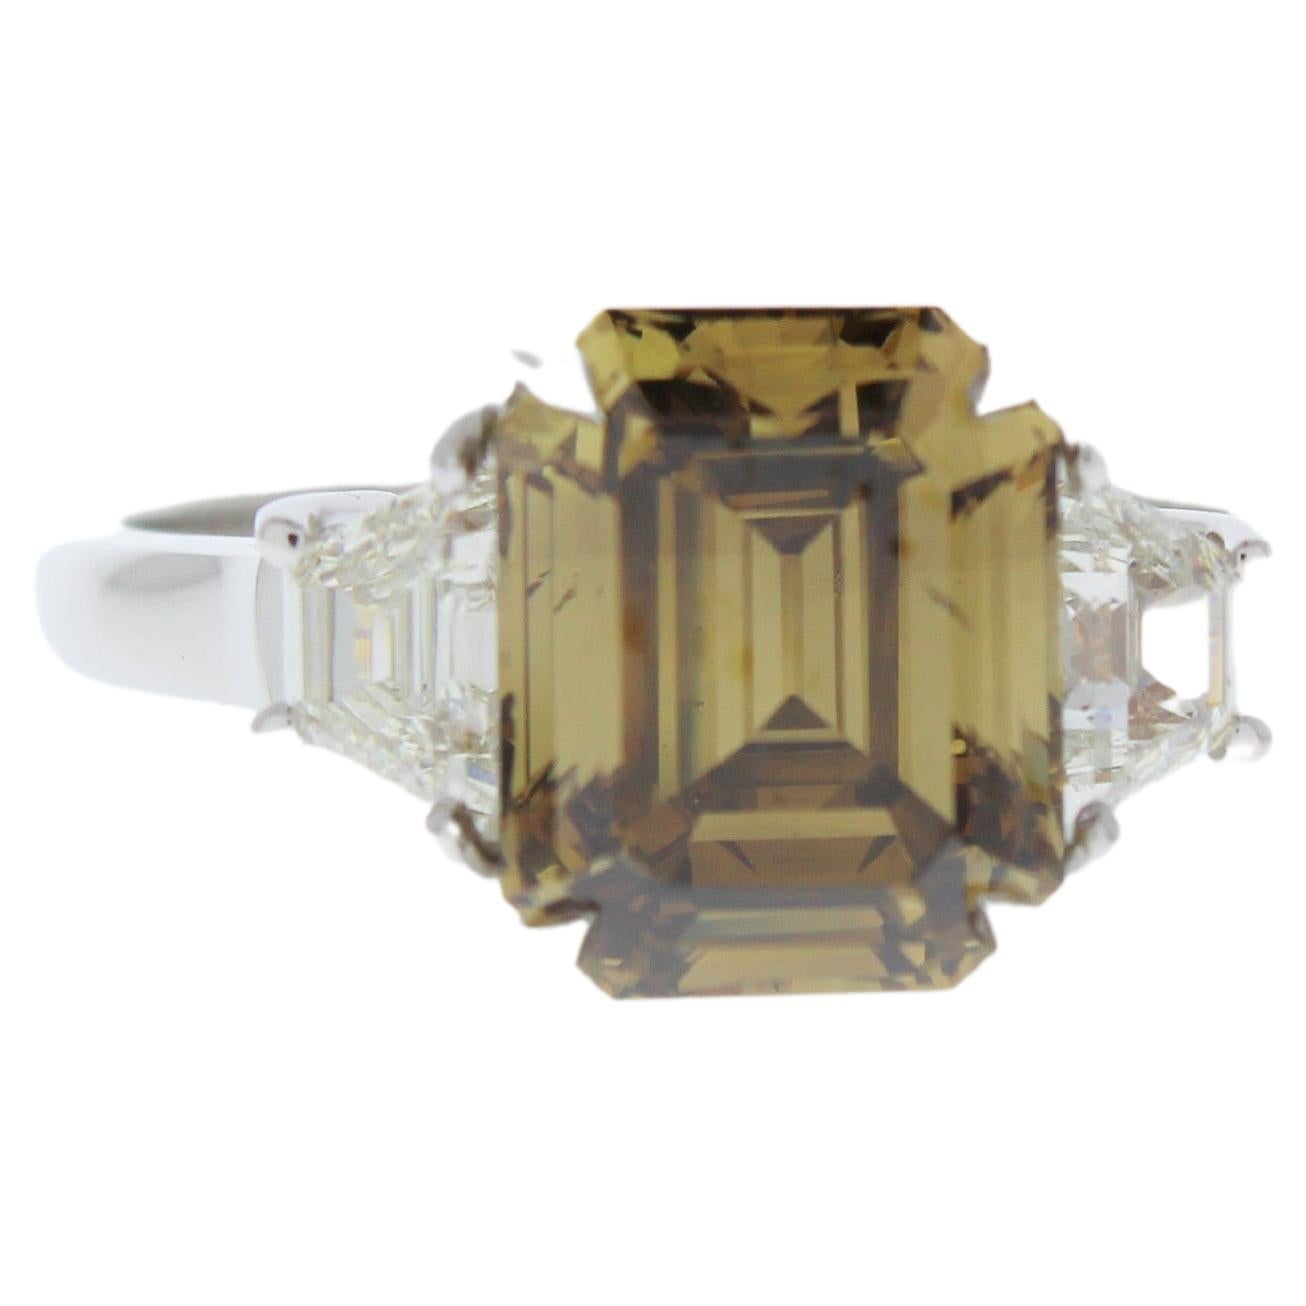 3.79 Carat Emerald Cut Fancy Brown Diamond and Diamond Ring in 18K White Gold For Sale